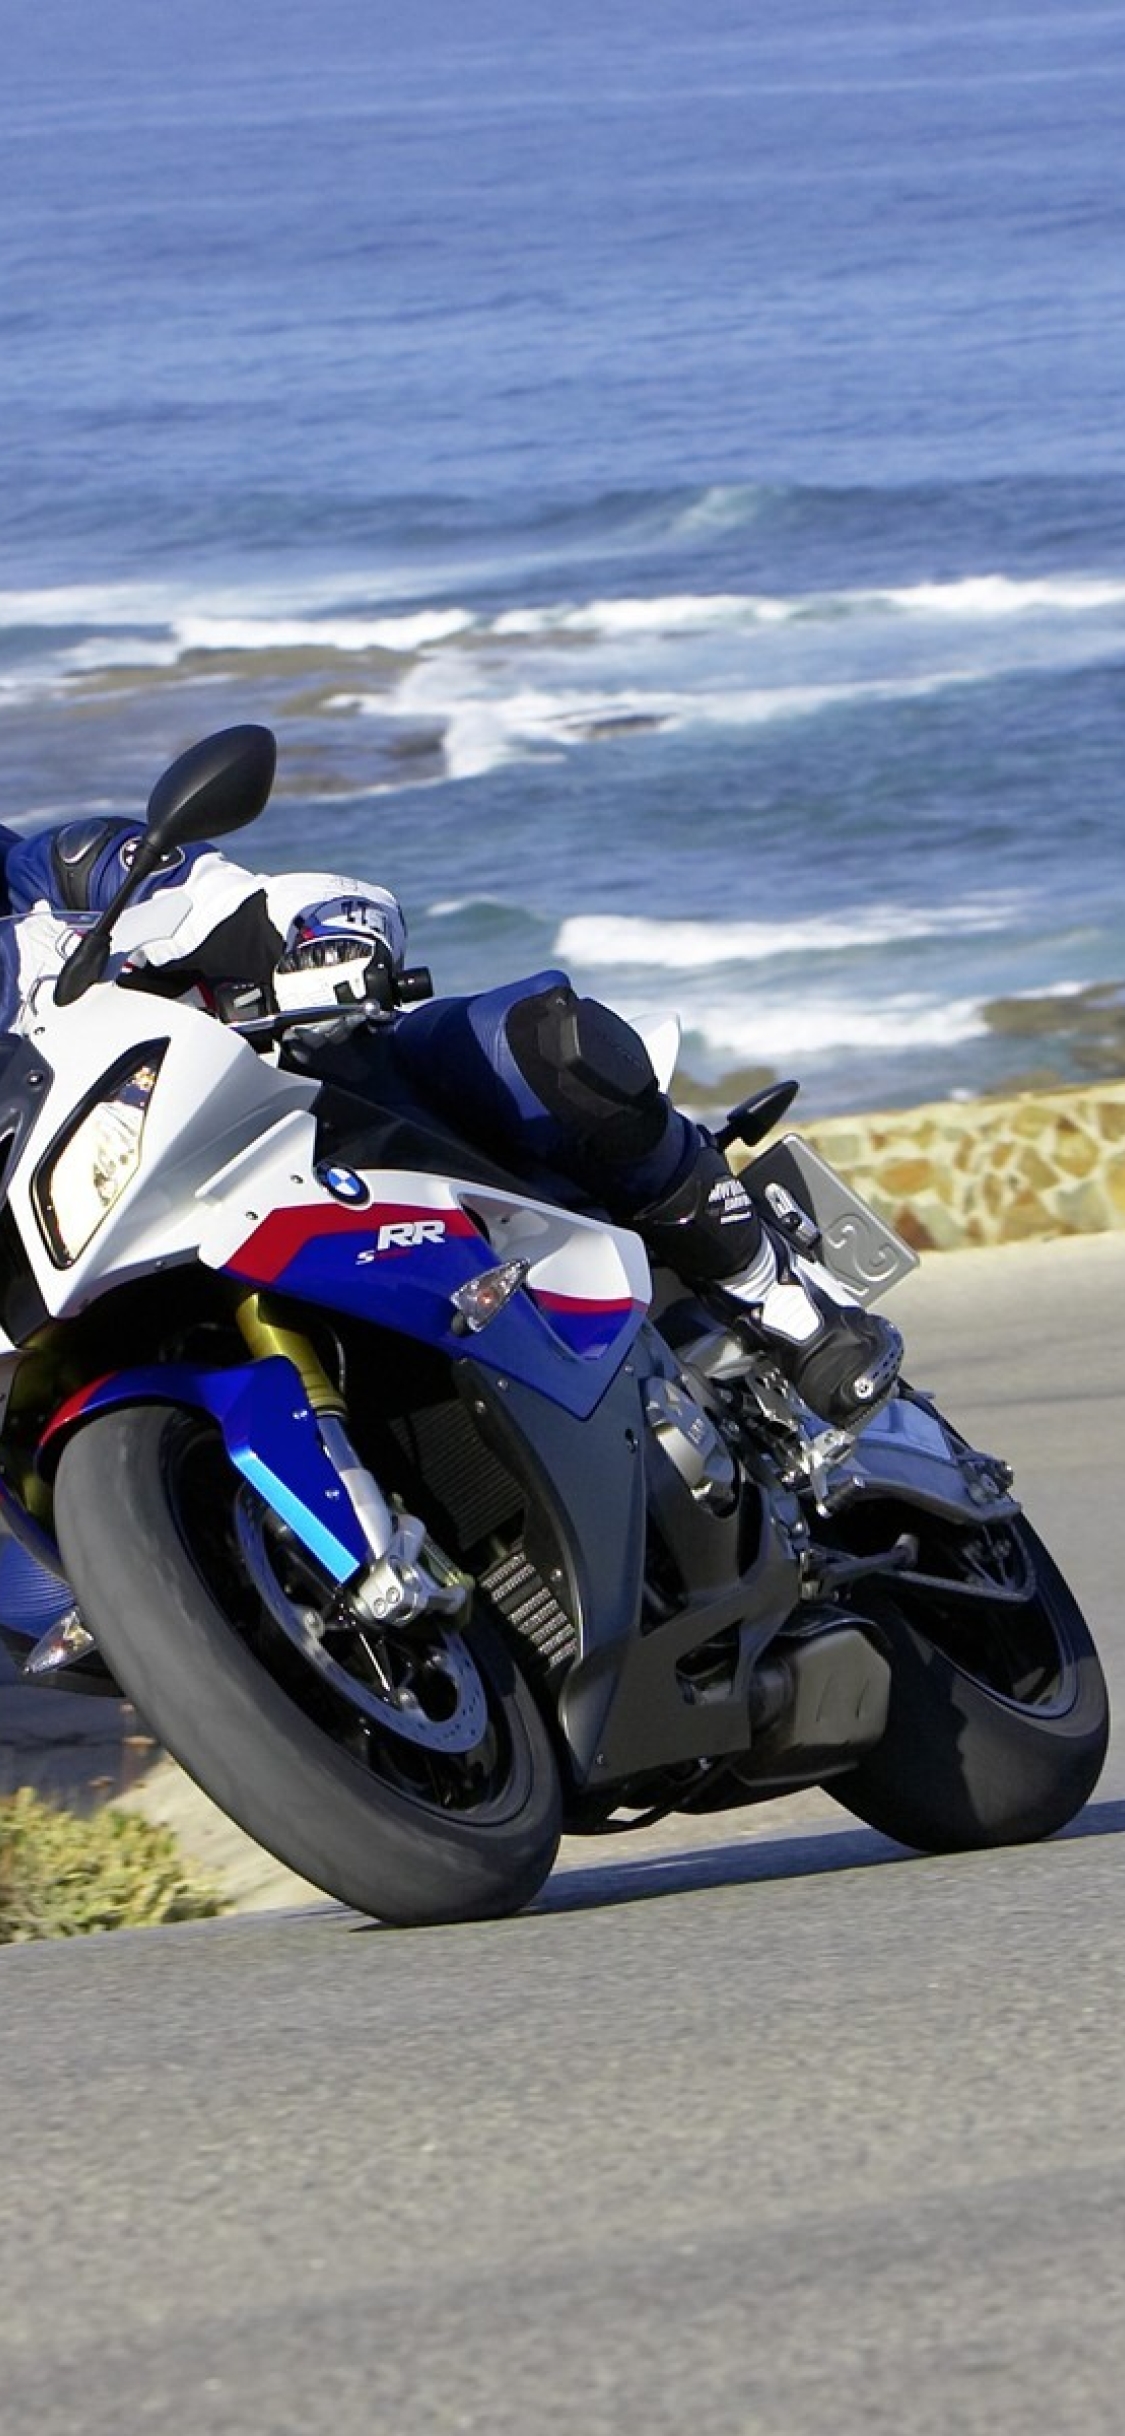 14+ A Bmw Motorcycle Wallpaper Pictures | Good Car Wallpaper